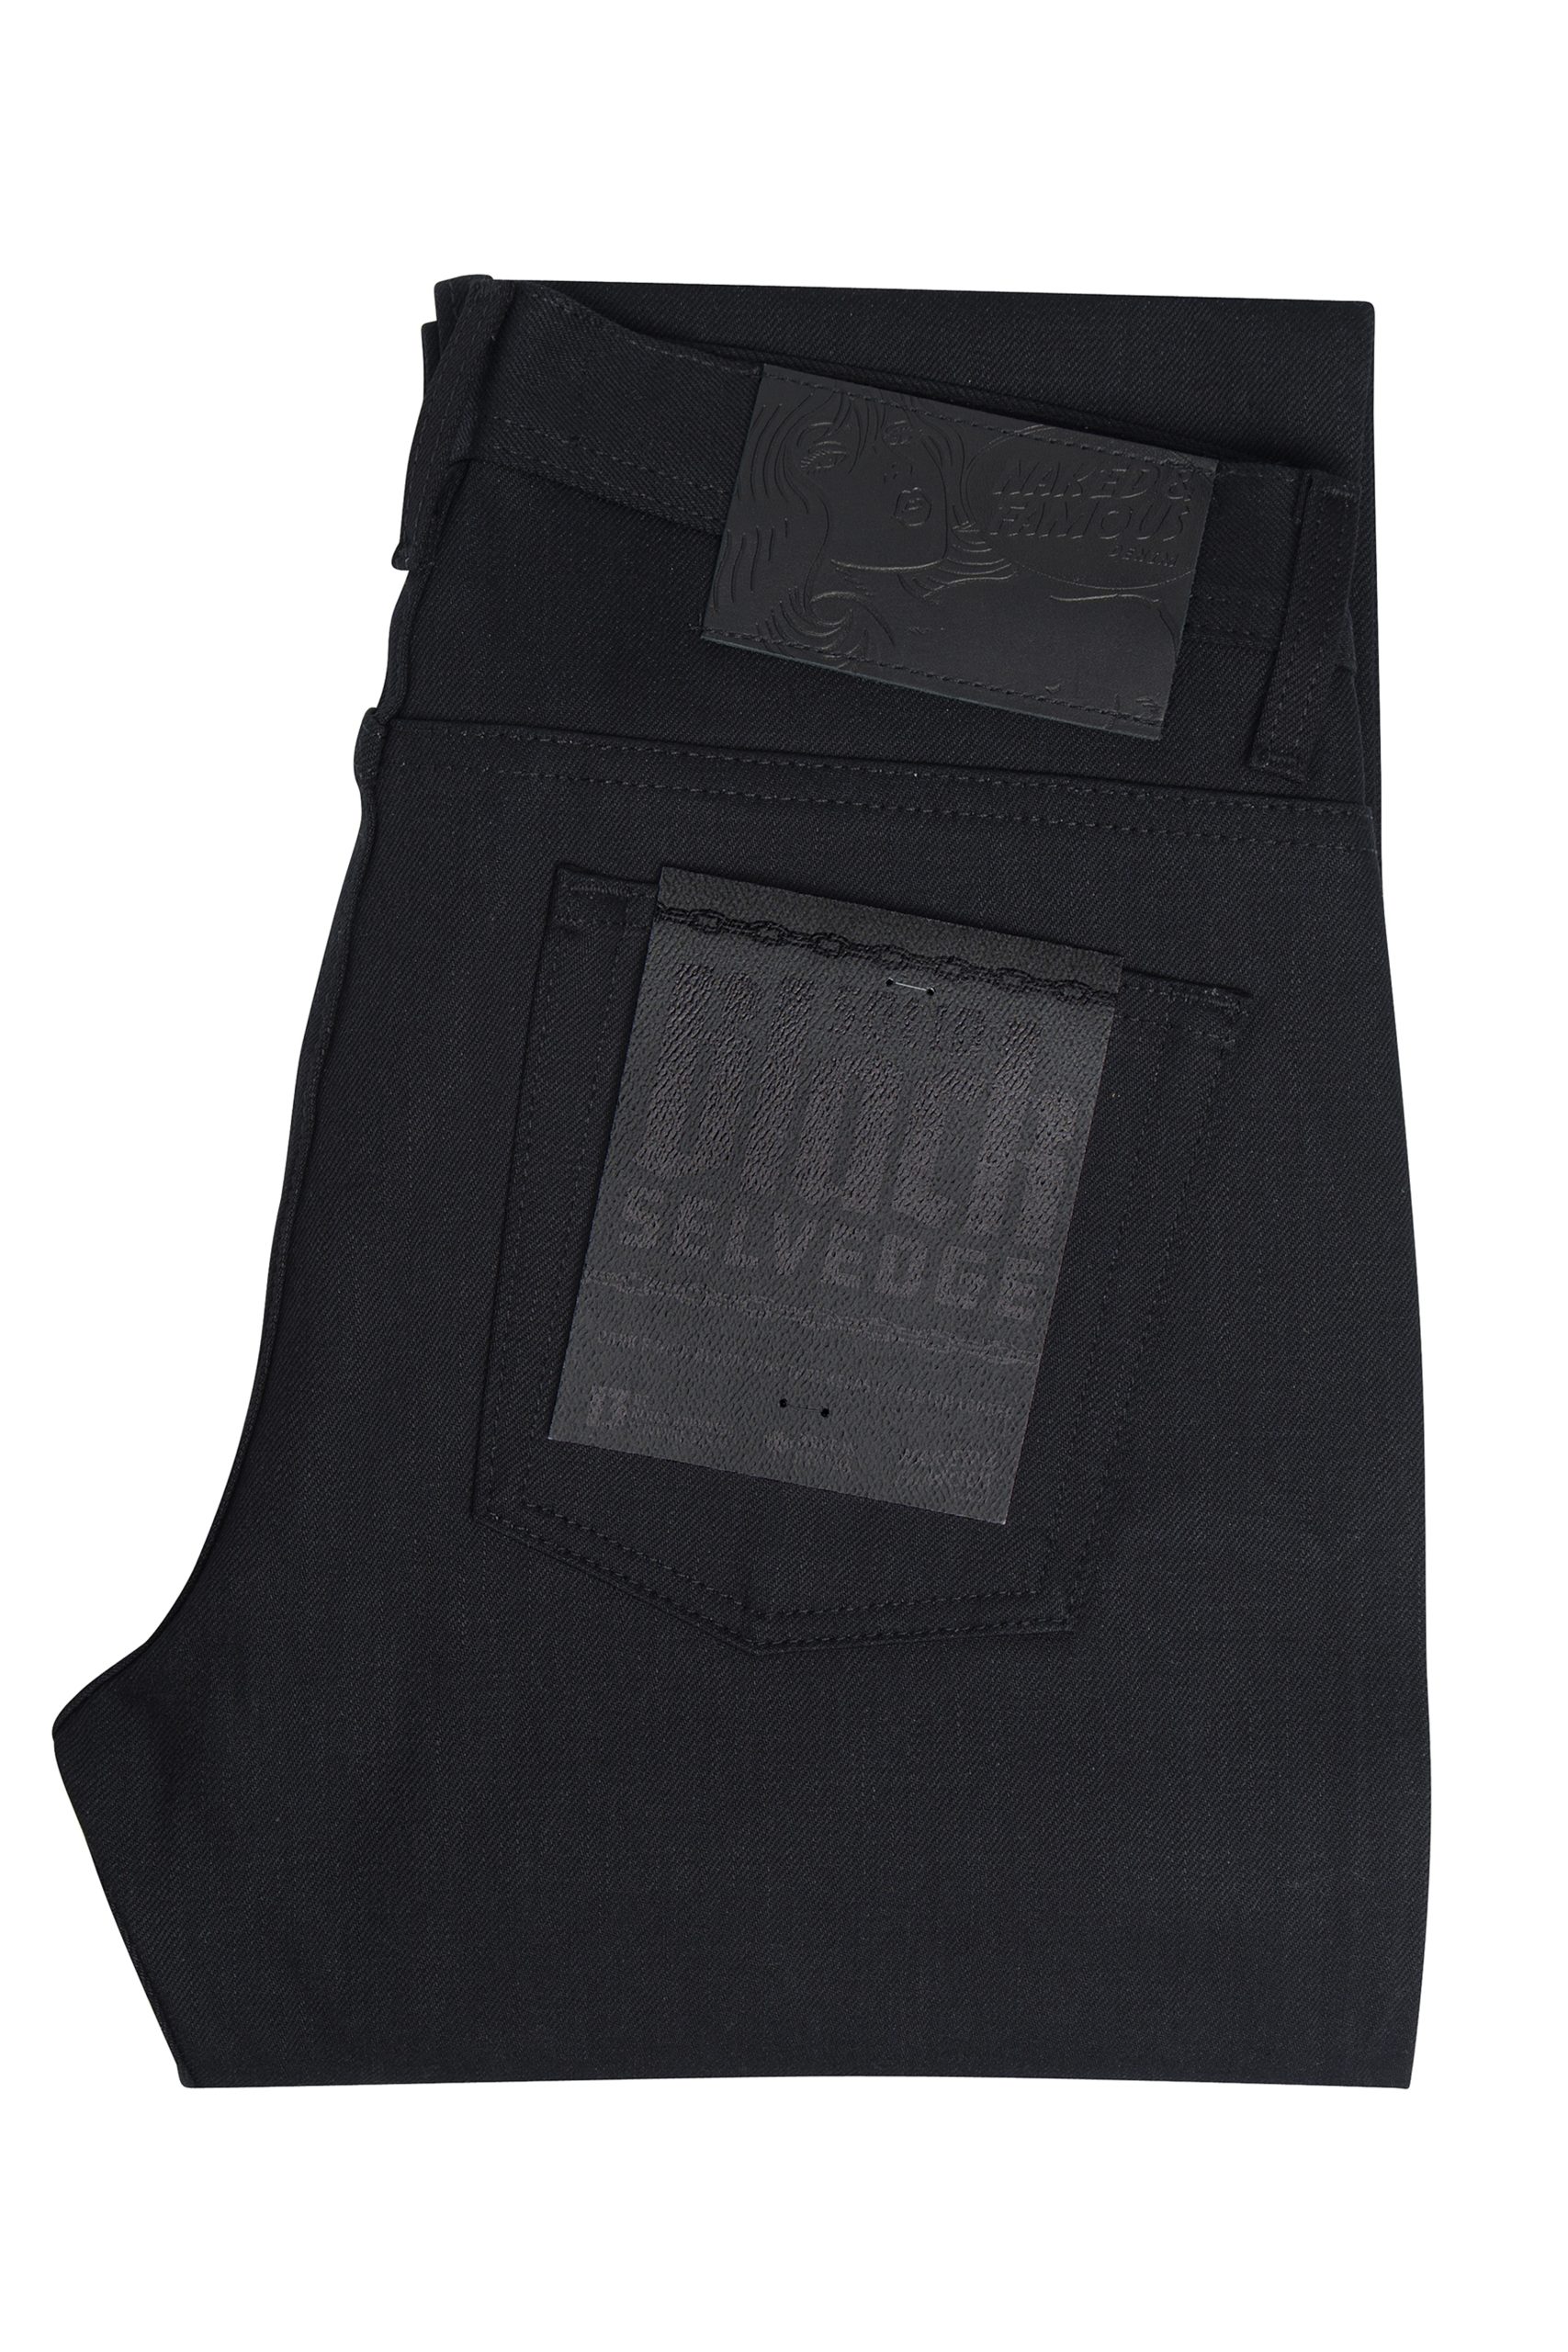 NAKED and FAMOUS Jeans Weird Solid BLACK SELVEDGE